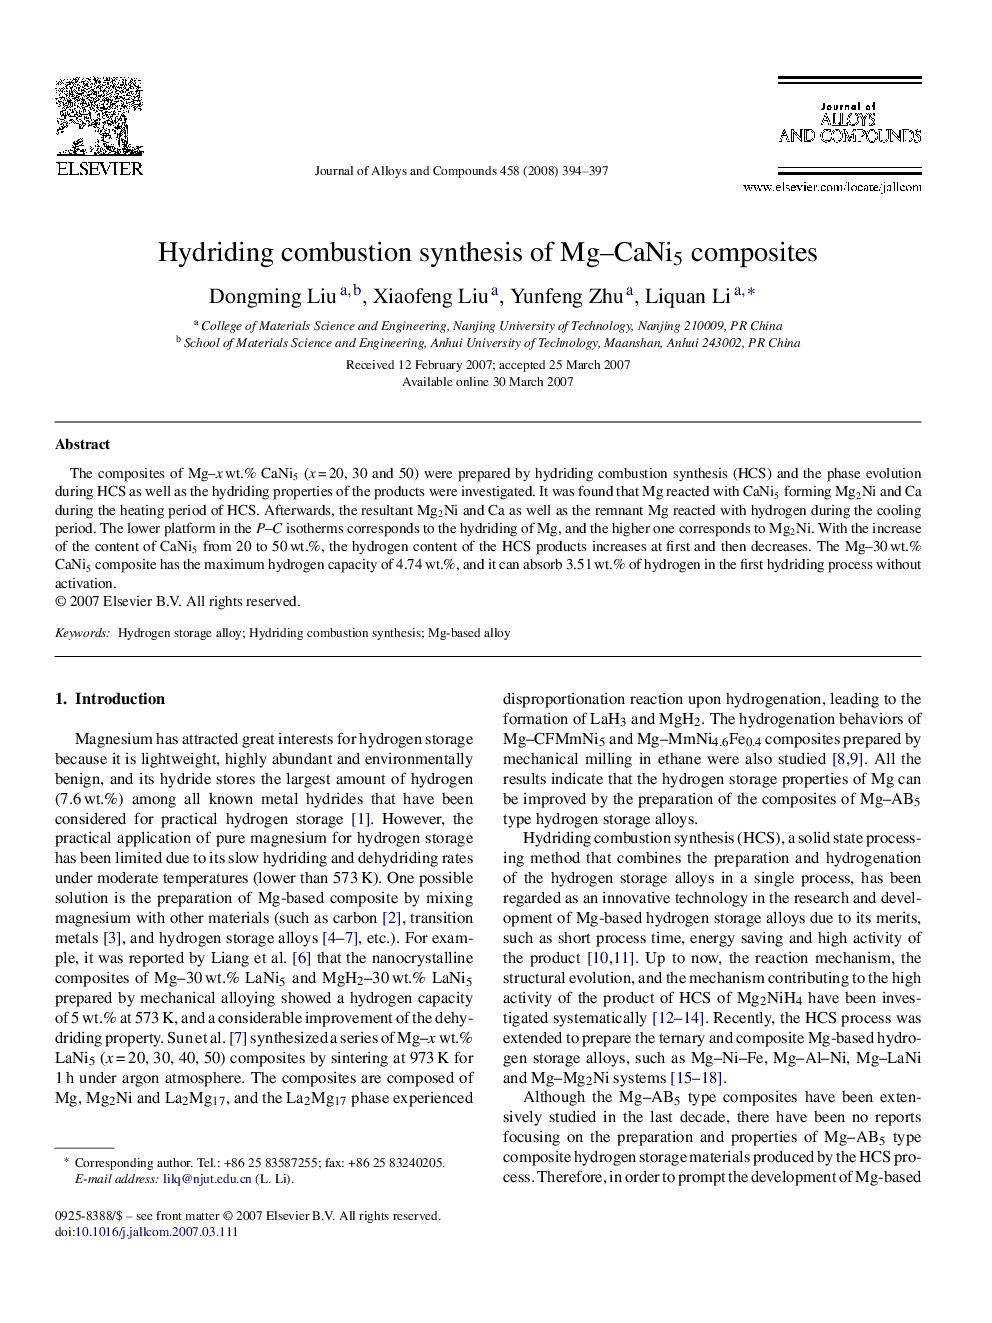 Hydriding combustion synthesis of Mg-CaNi5 composites